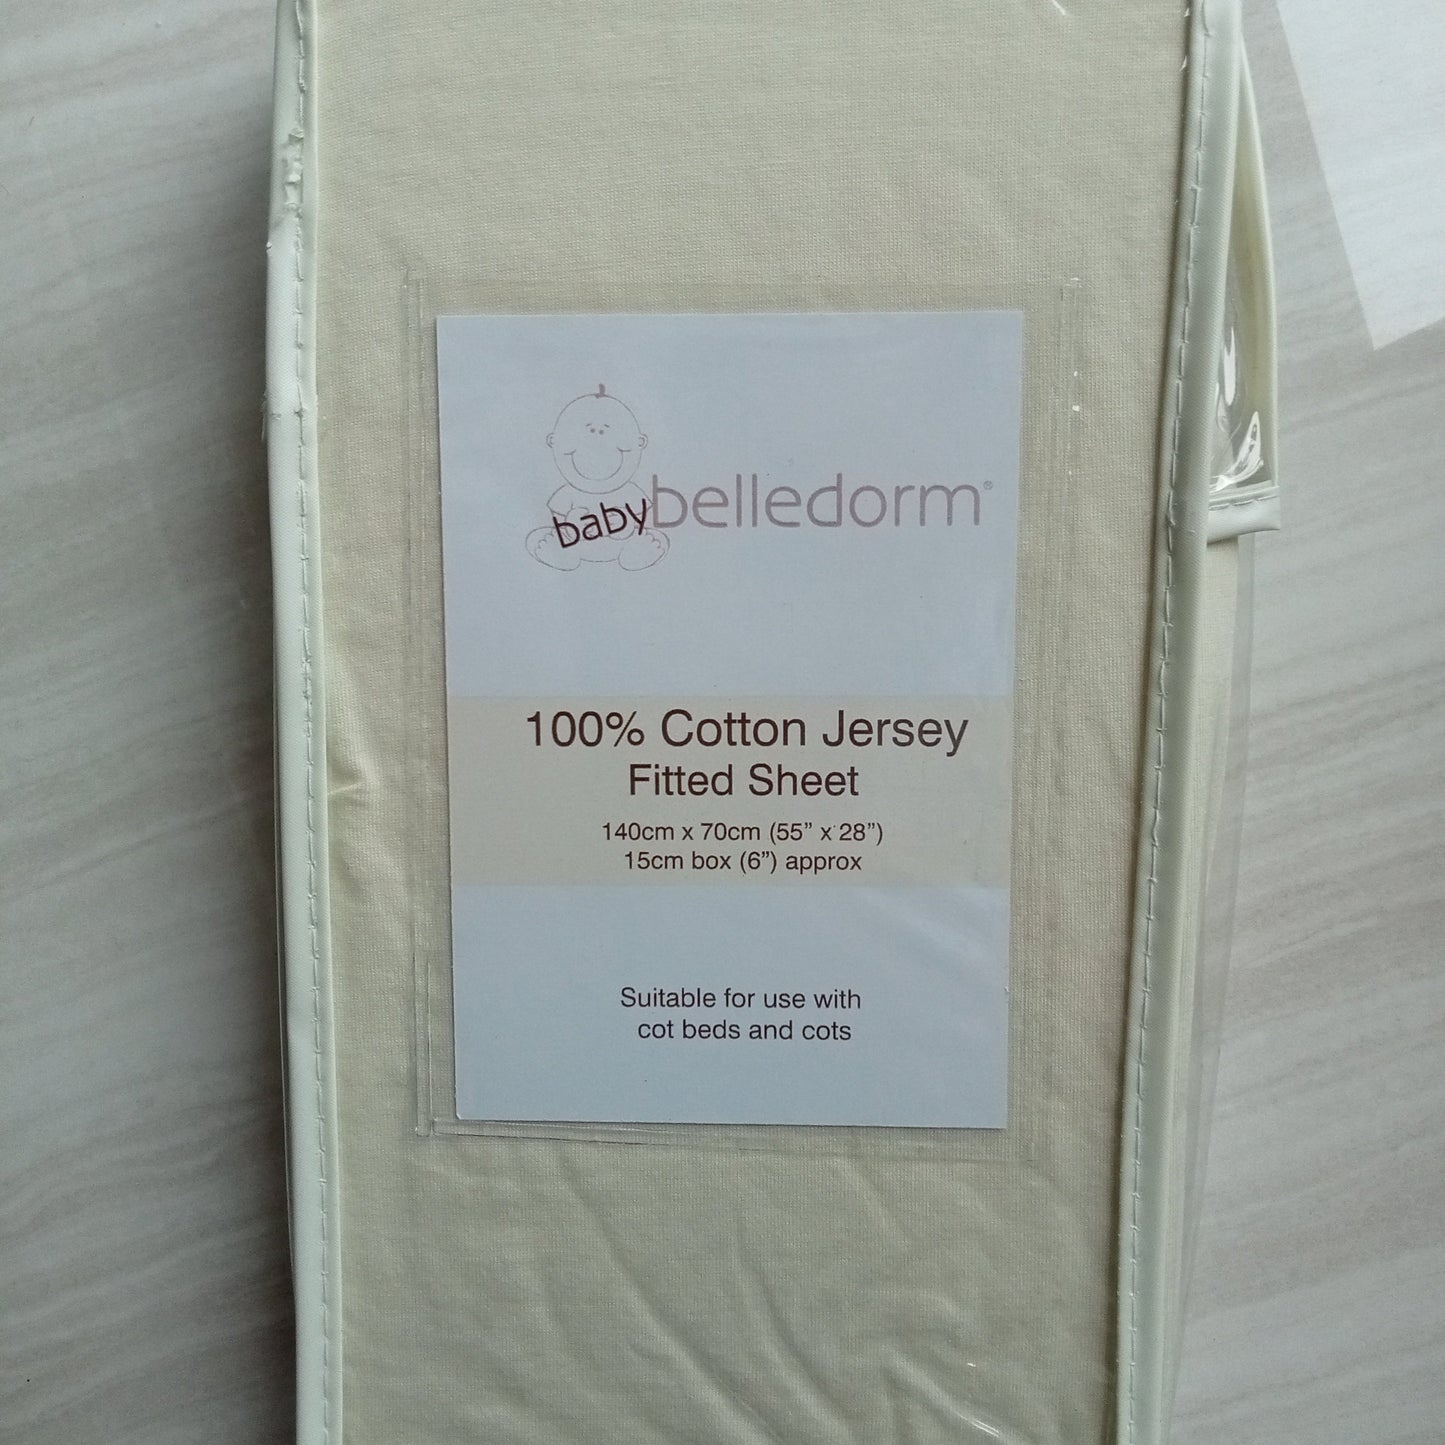 Fitted Sheet Cotton Jersey by Baby Belledorm